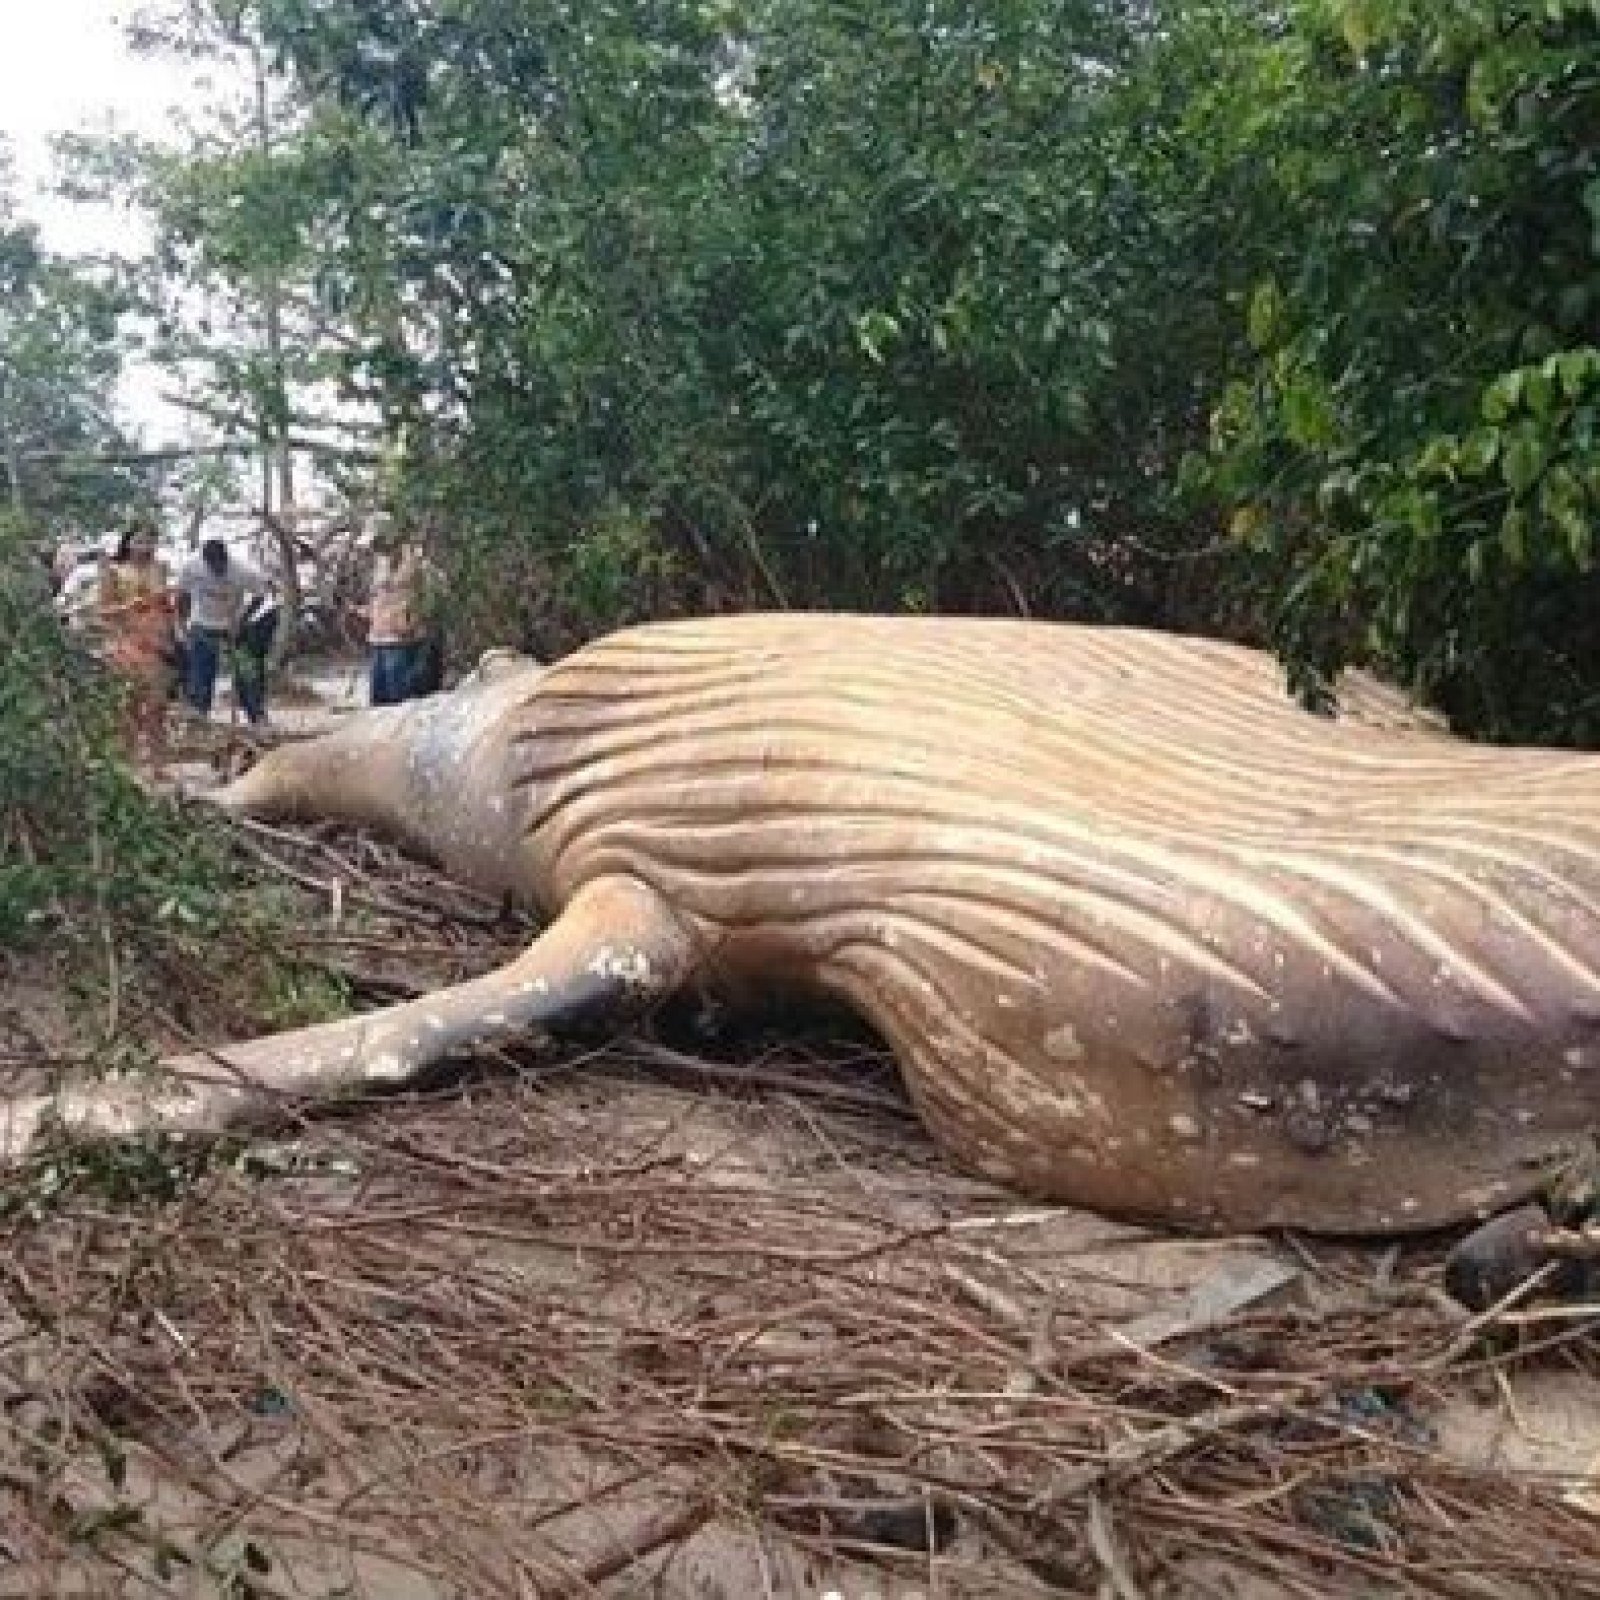 Humpback Whale Discovered In Amazon Jungle In Wildlife Mystery That Has Scientists Baffled